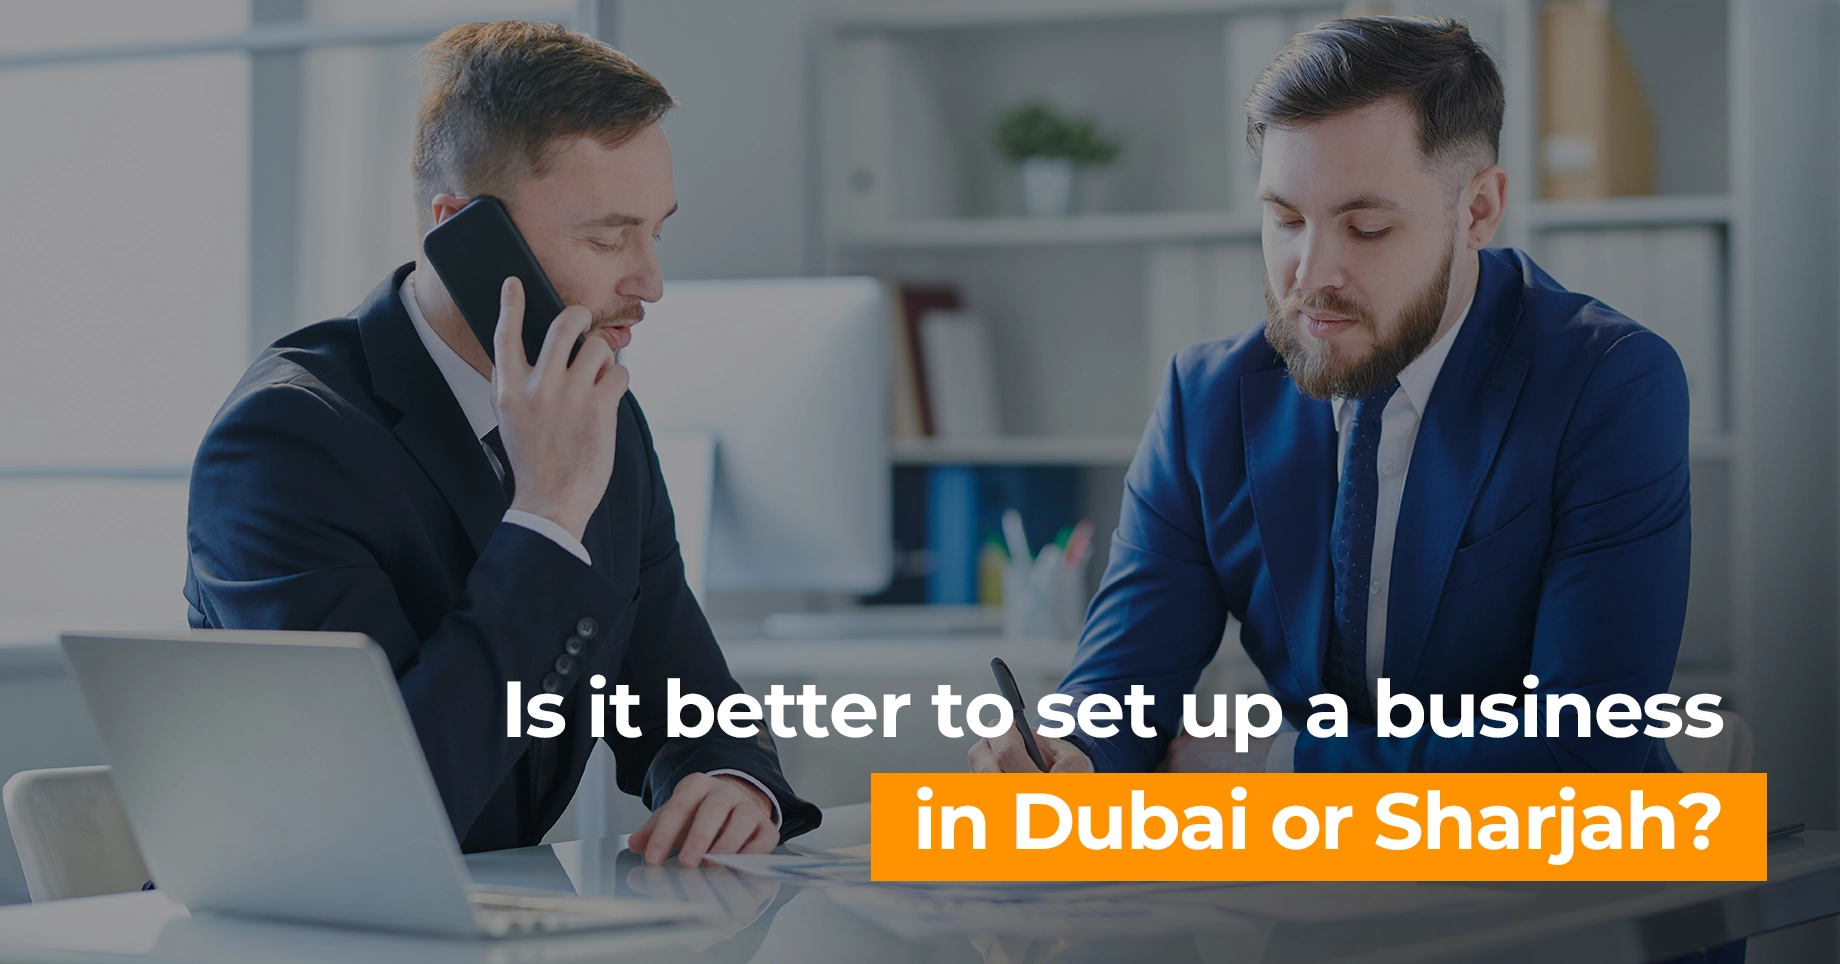 Is it better to set up a business in Dubai or Sharjah?